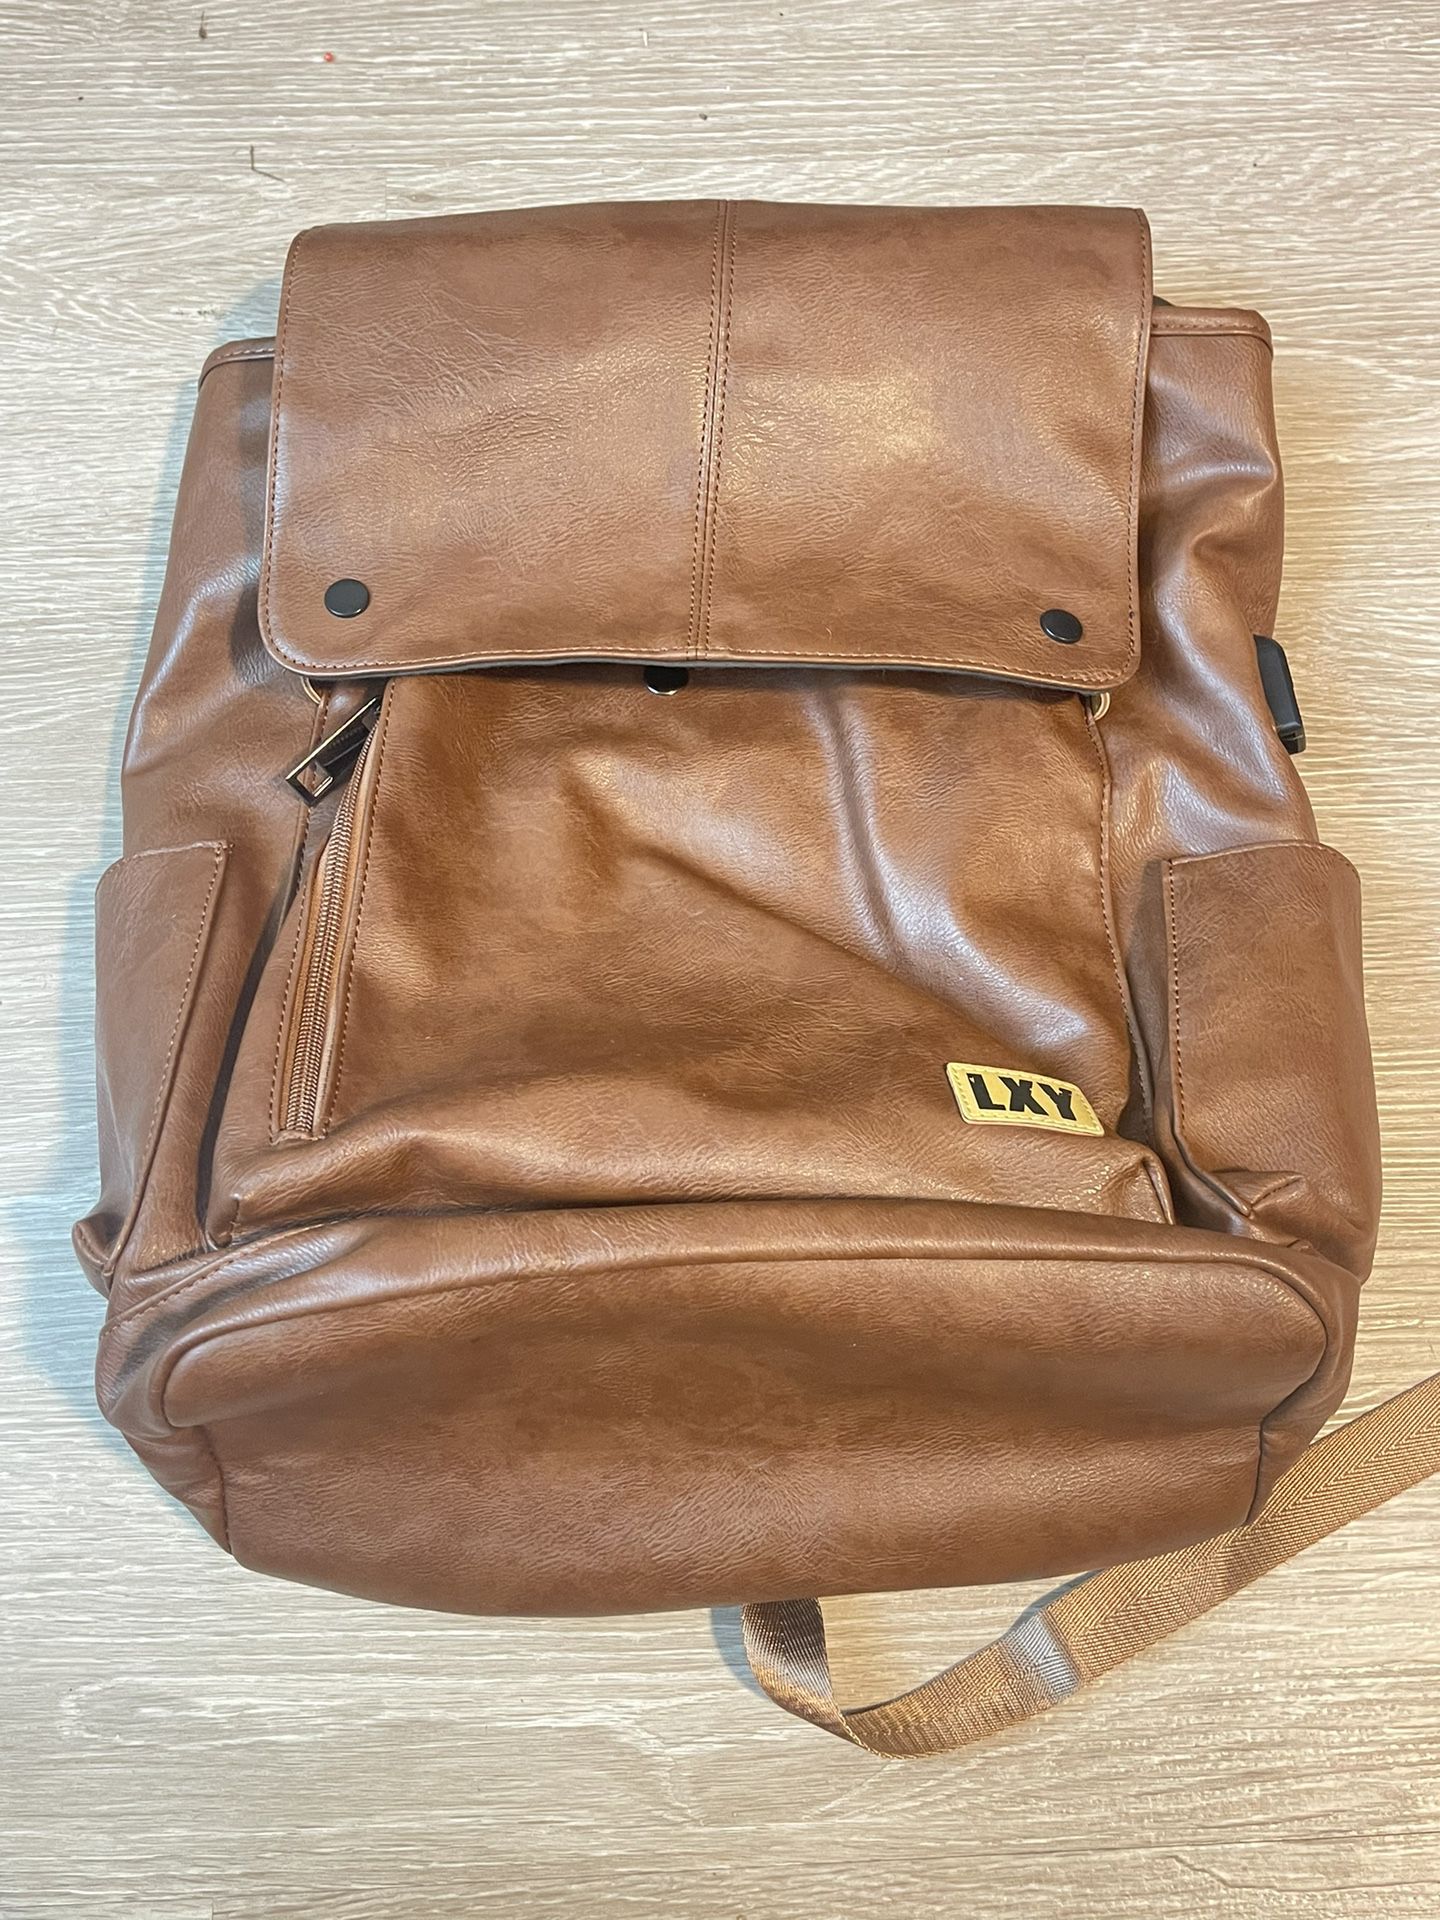 LXY Light Brown Vegan “Leather” Backpack Never Worn 